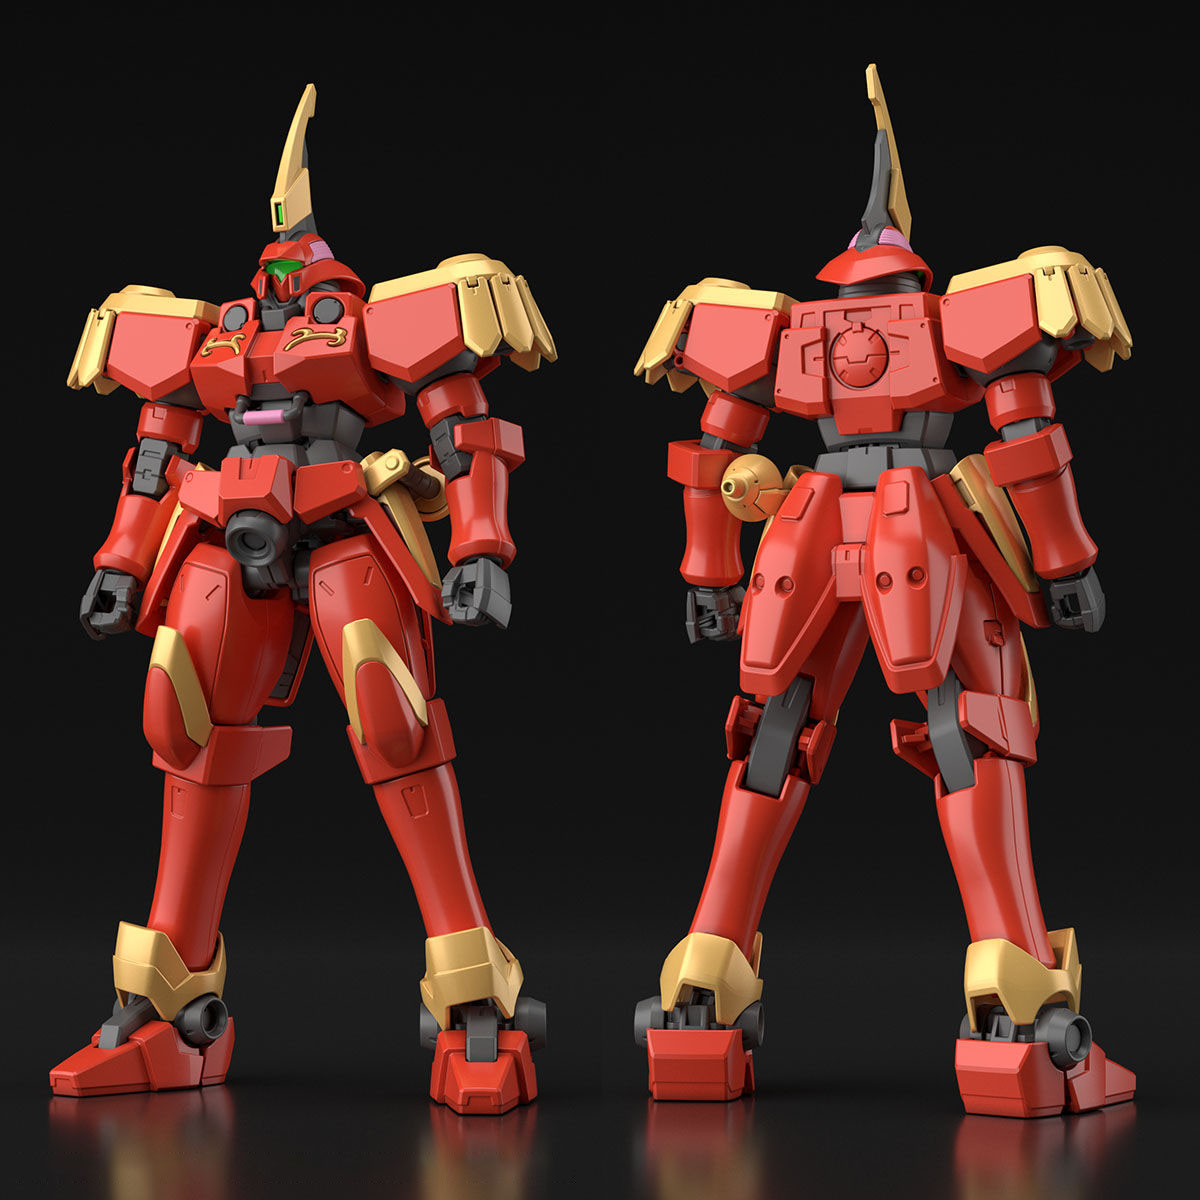 HG 1/144 LEO-S [Oct 2021 Delivery]